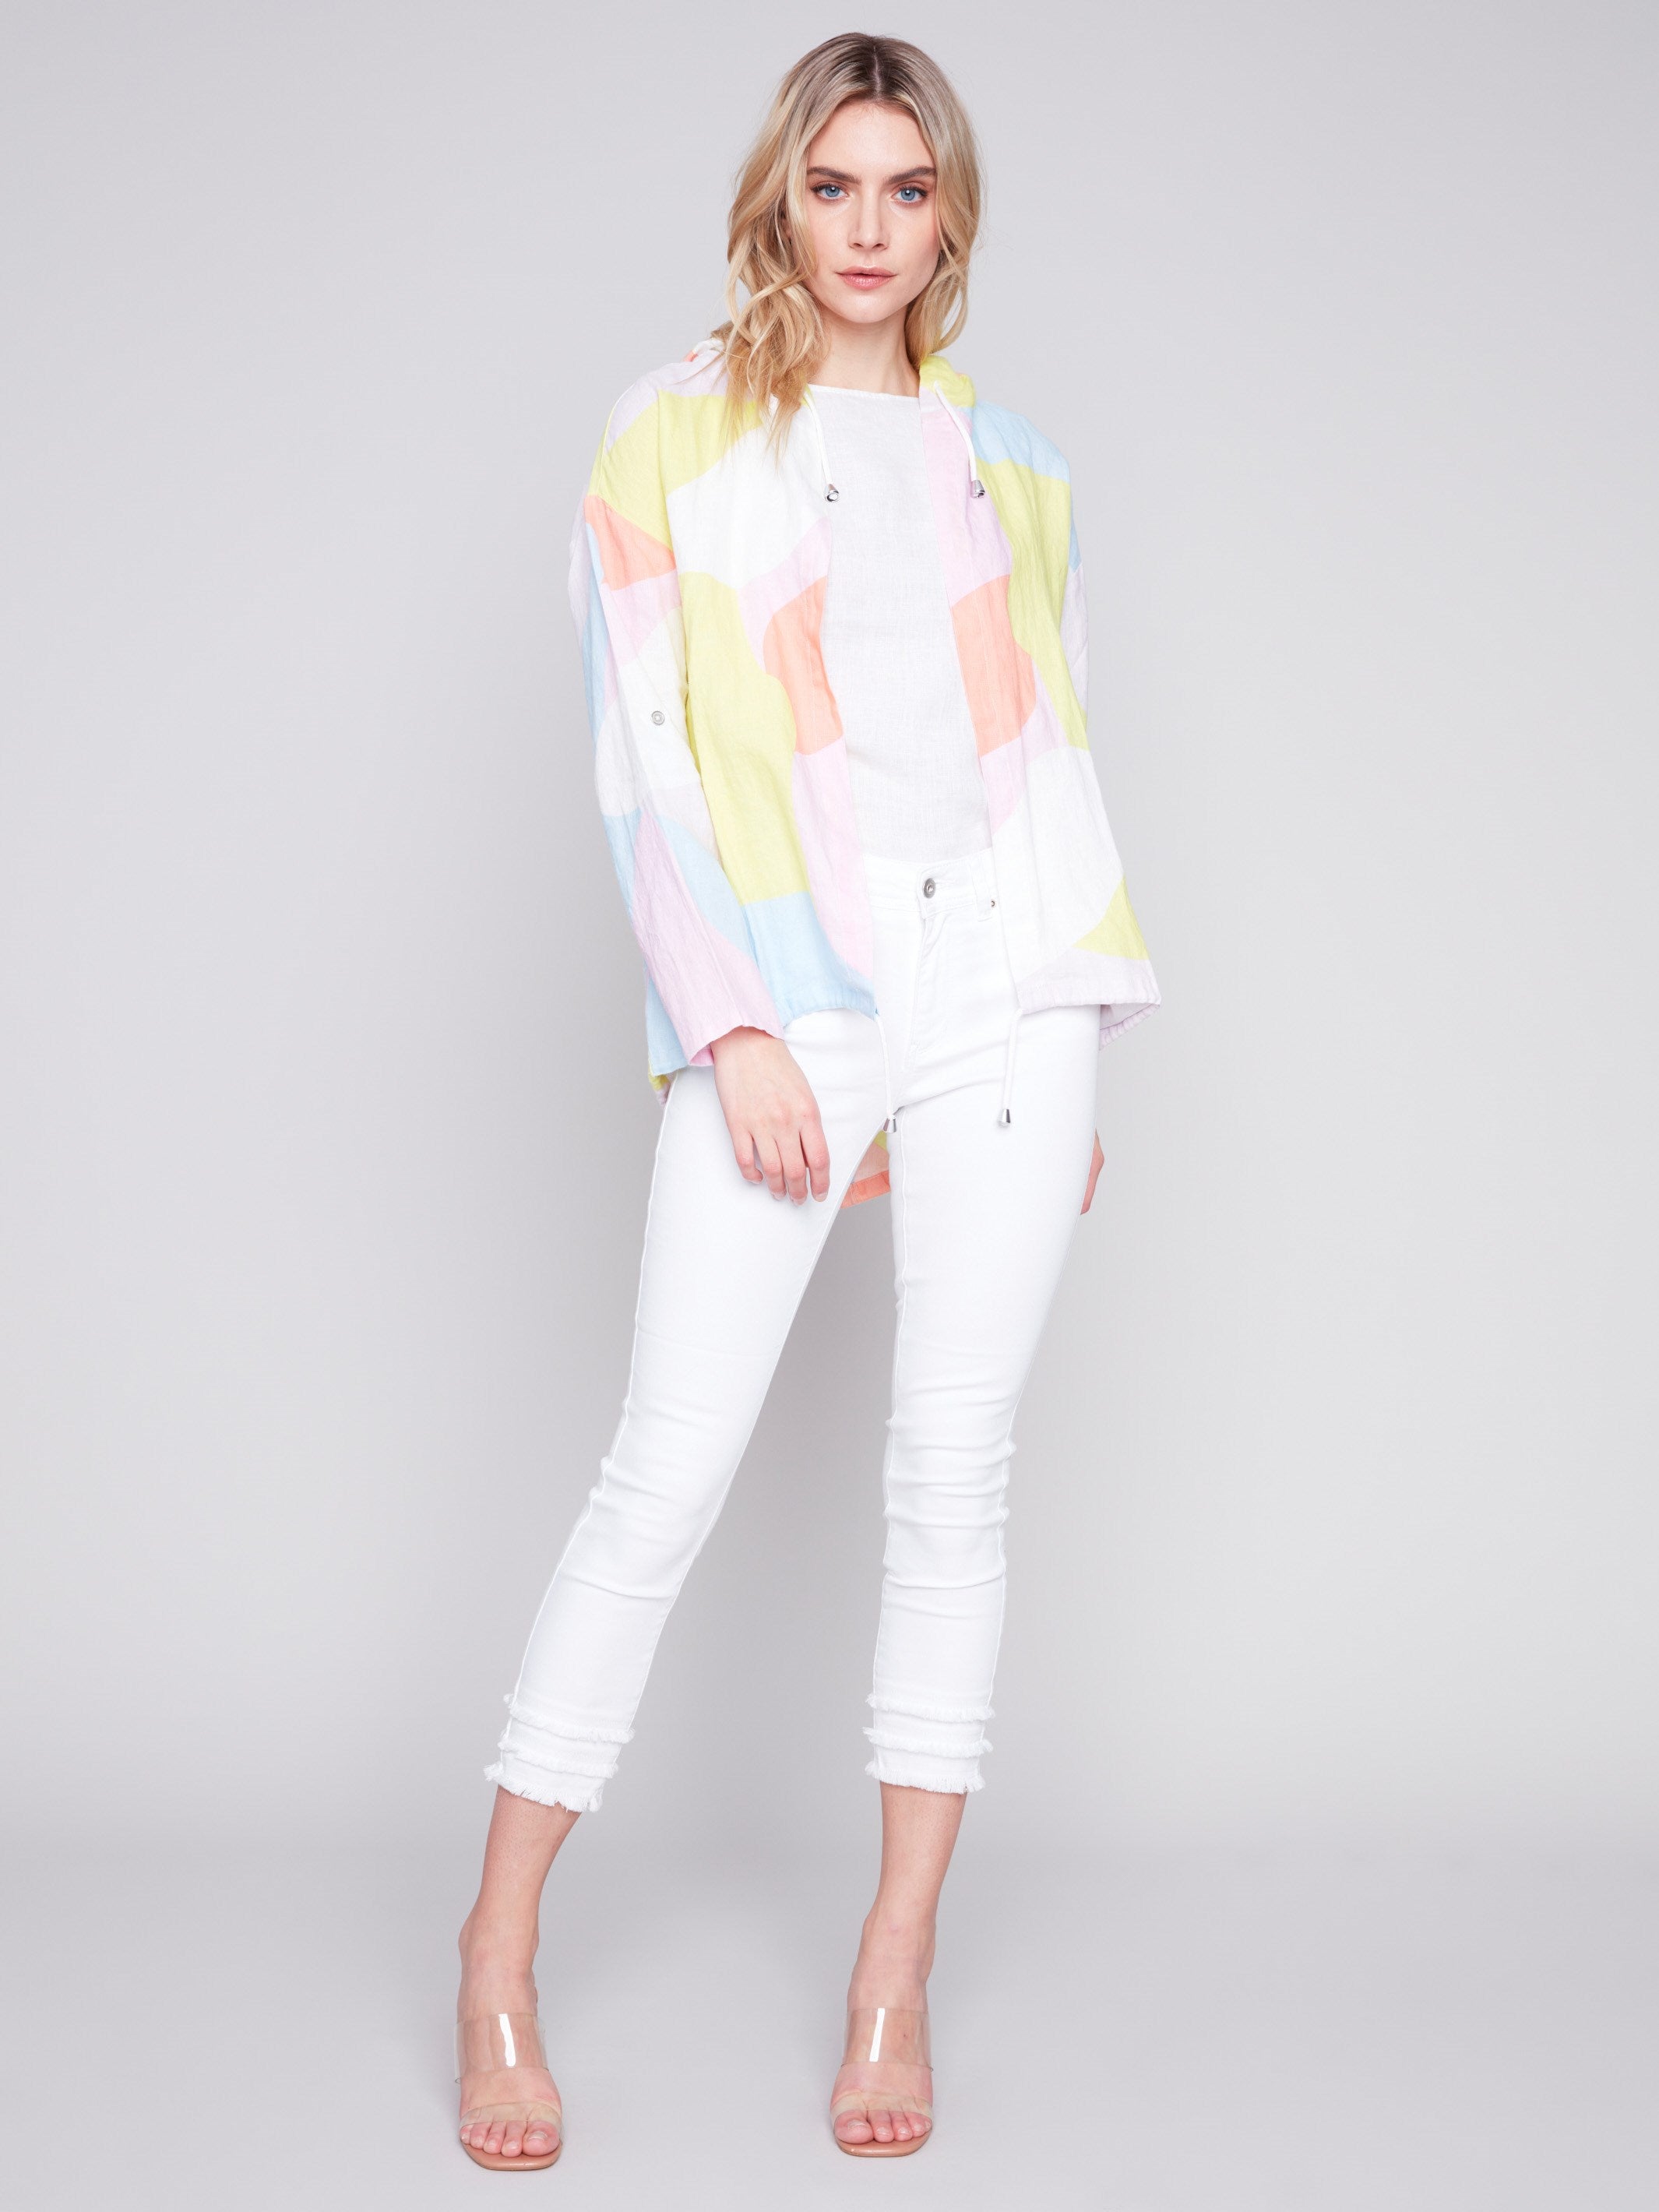 Printed Linen Duster Jacket - Graffiti - Charlie B Collection Canada - Image 3